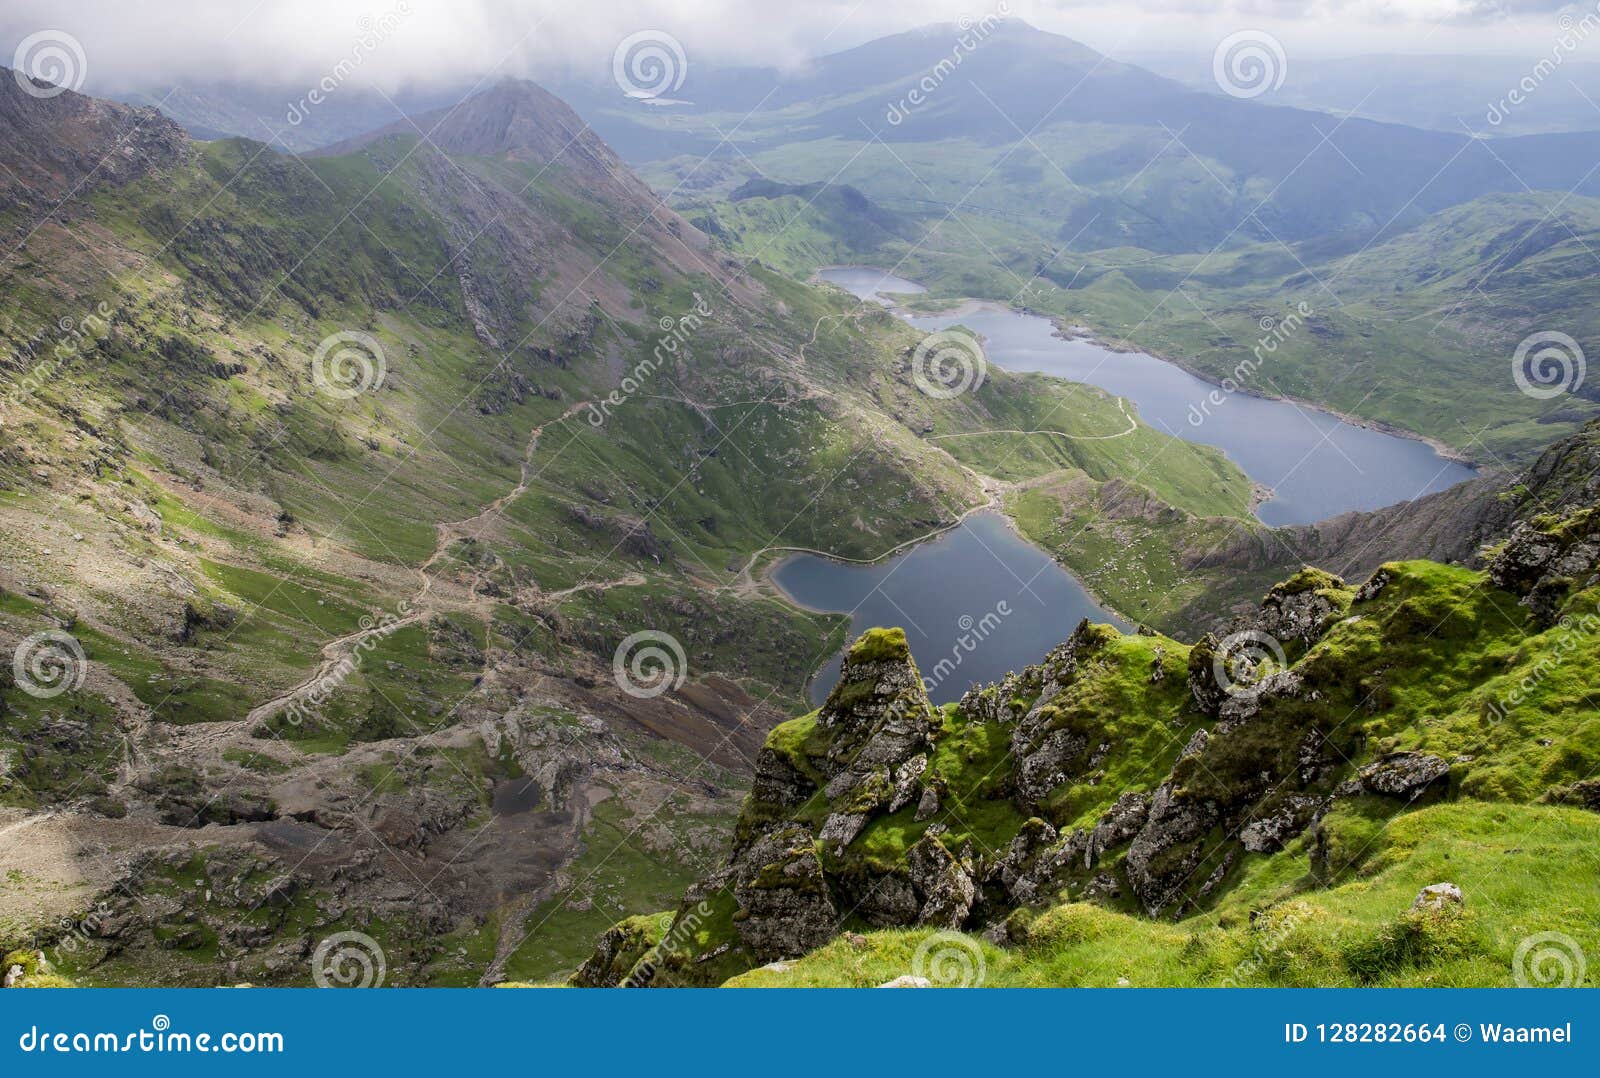 view from mount snowdon wales